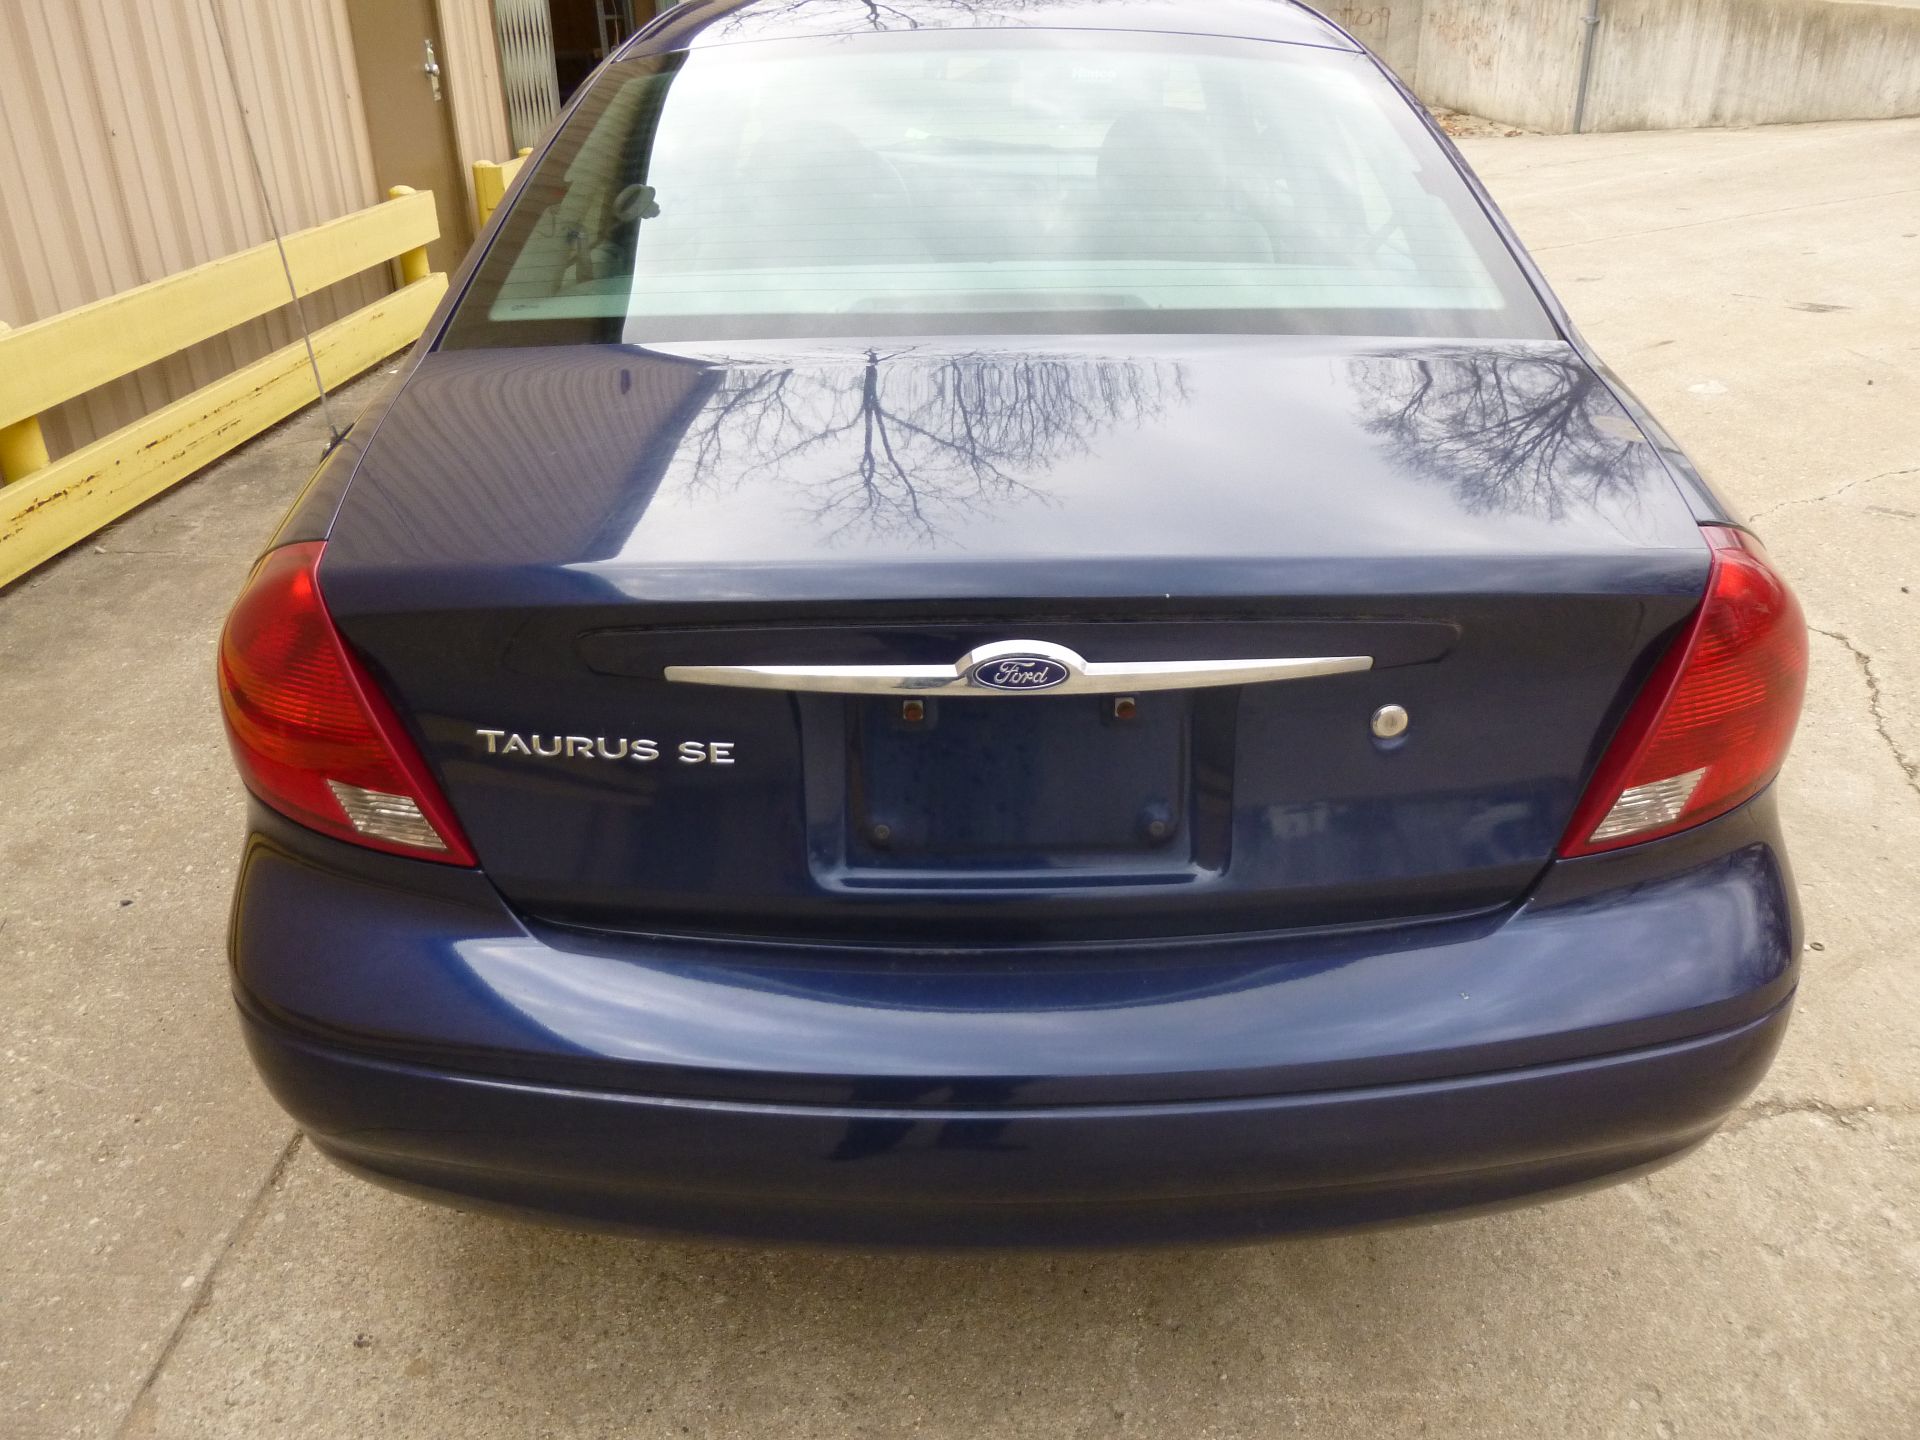 2002 Ford Taurus Municipally maintained Miles 92930 Vin # 1FAFP532X2G180779 CLEAR TITLE(located at - Image 8 of 12